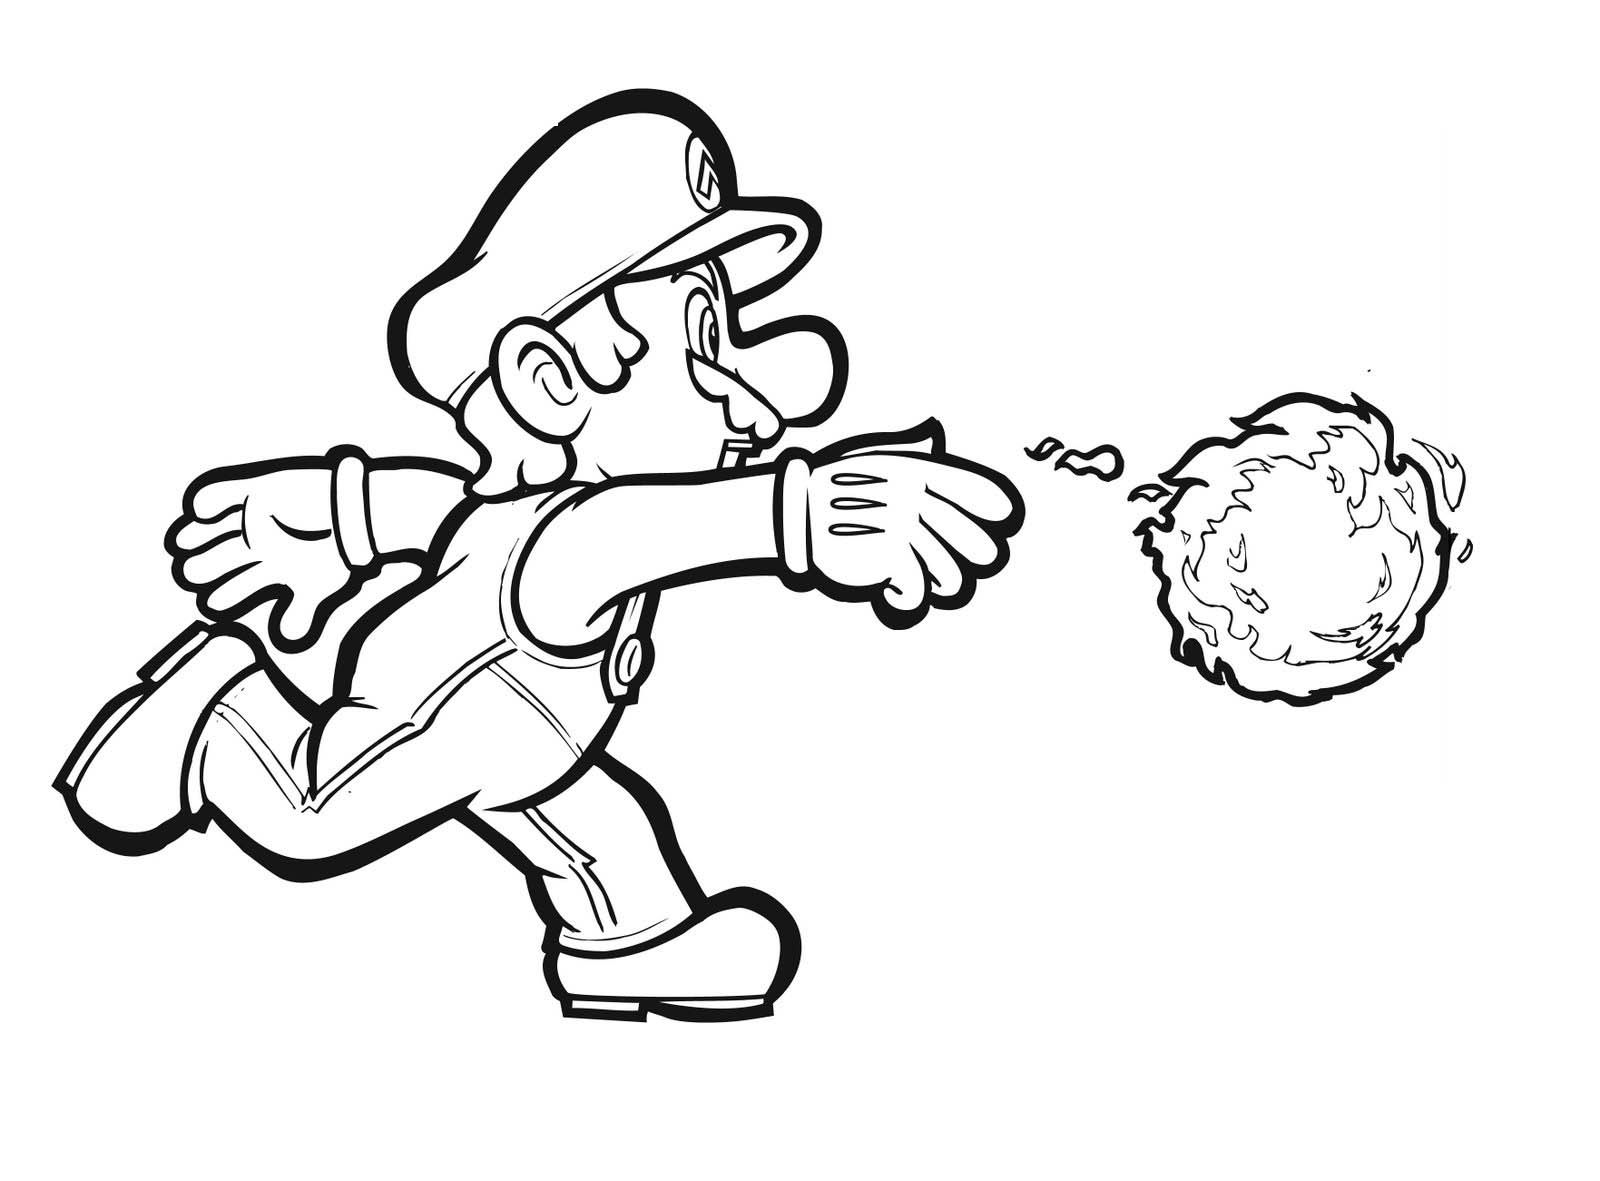 How To Print Coloring Pages Of Mario - Colors